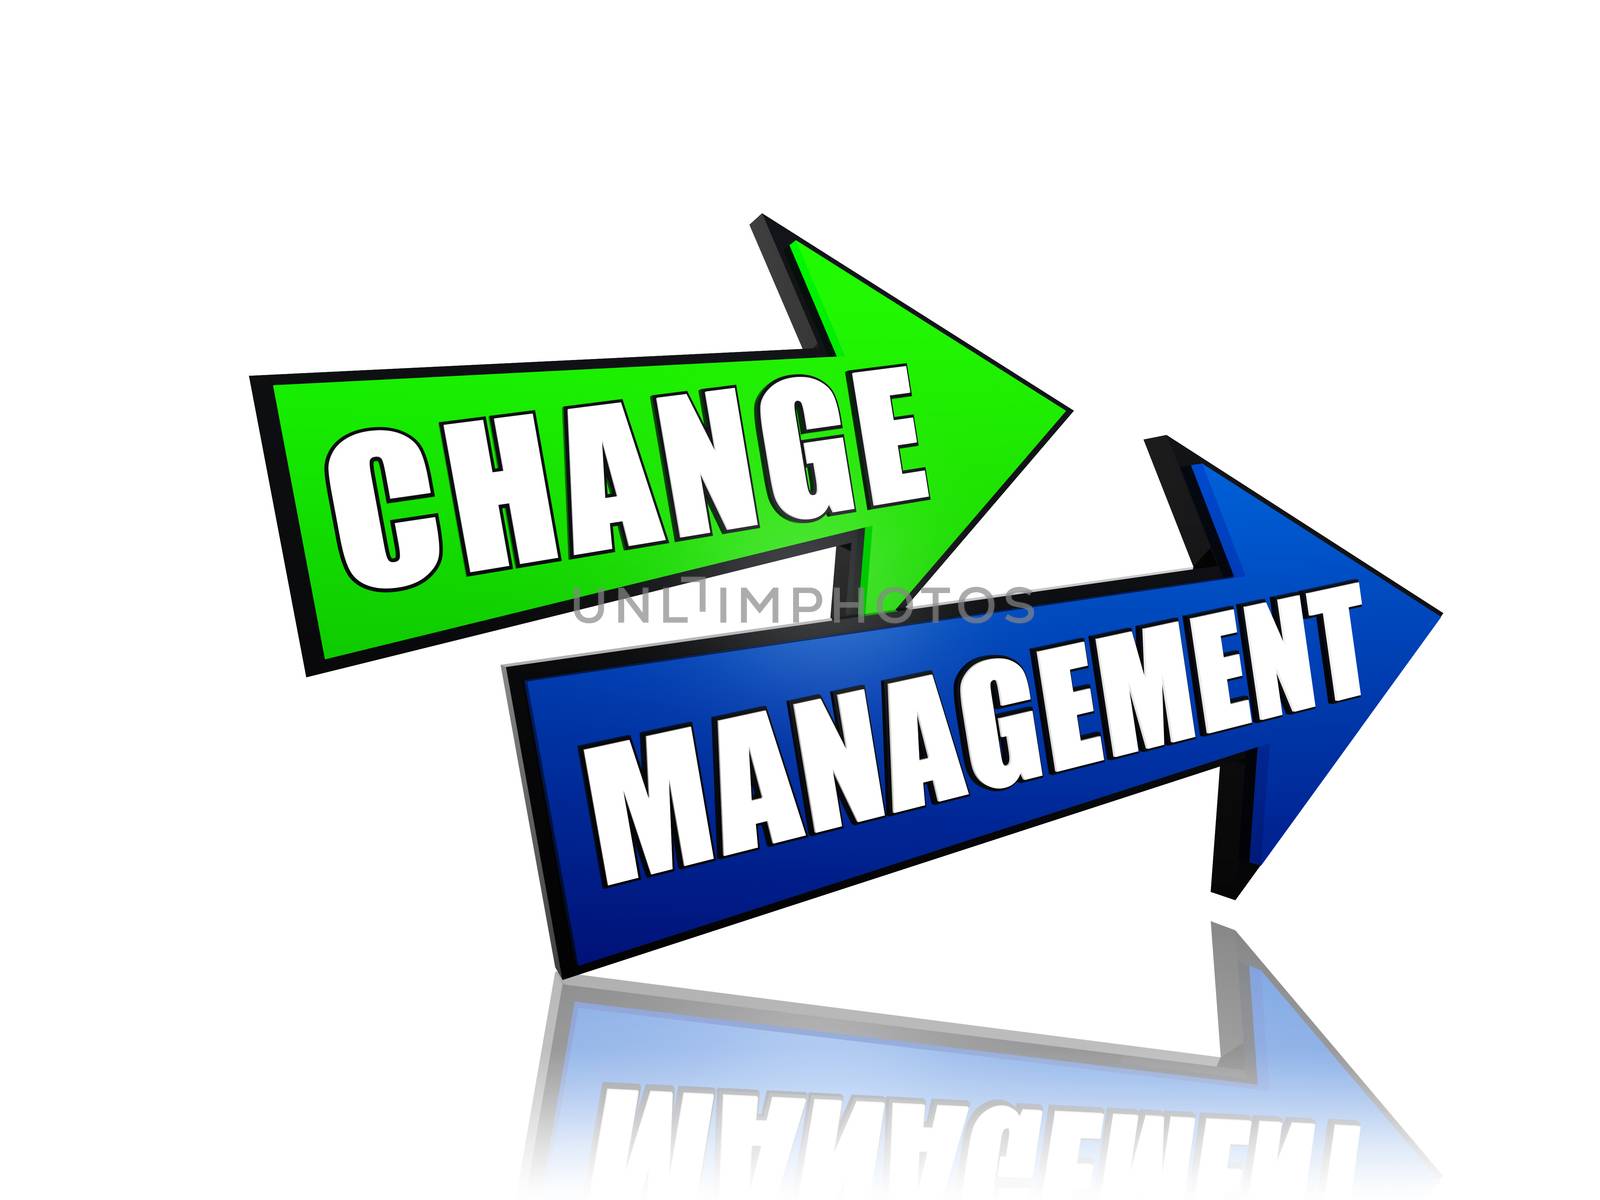 change management in arrows by marinini